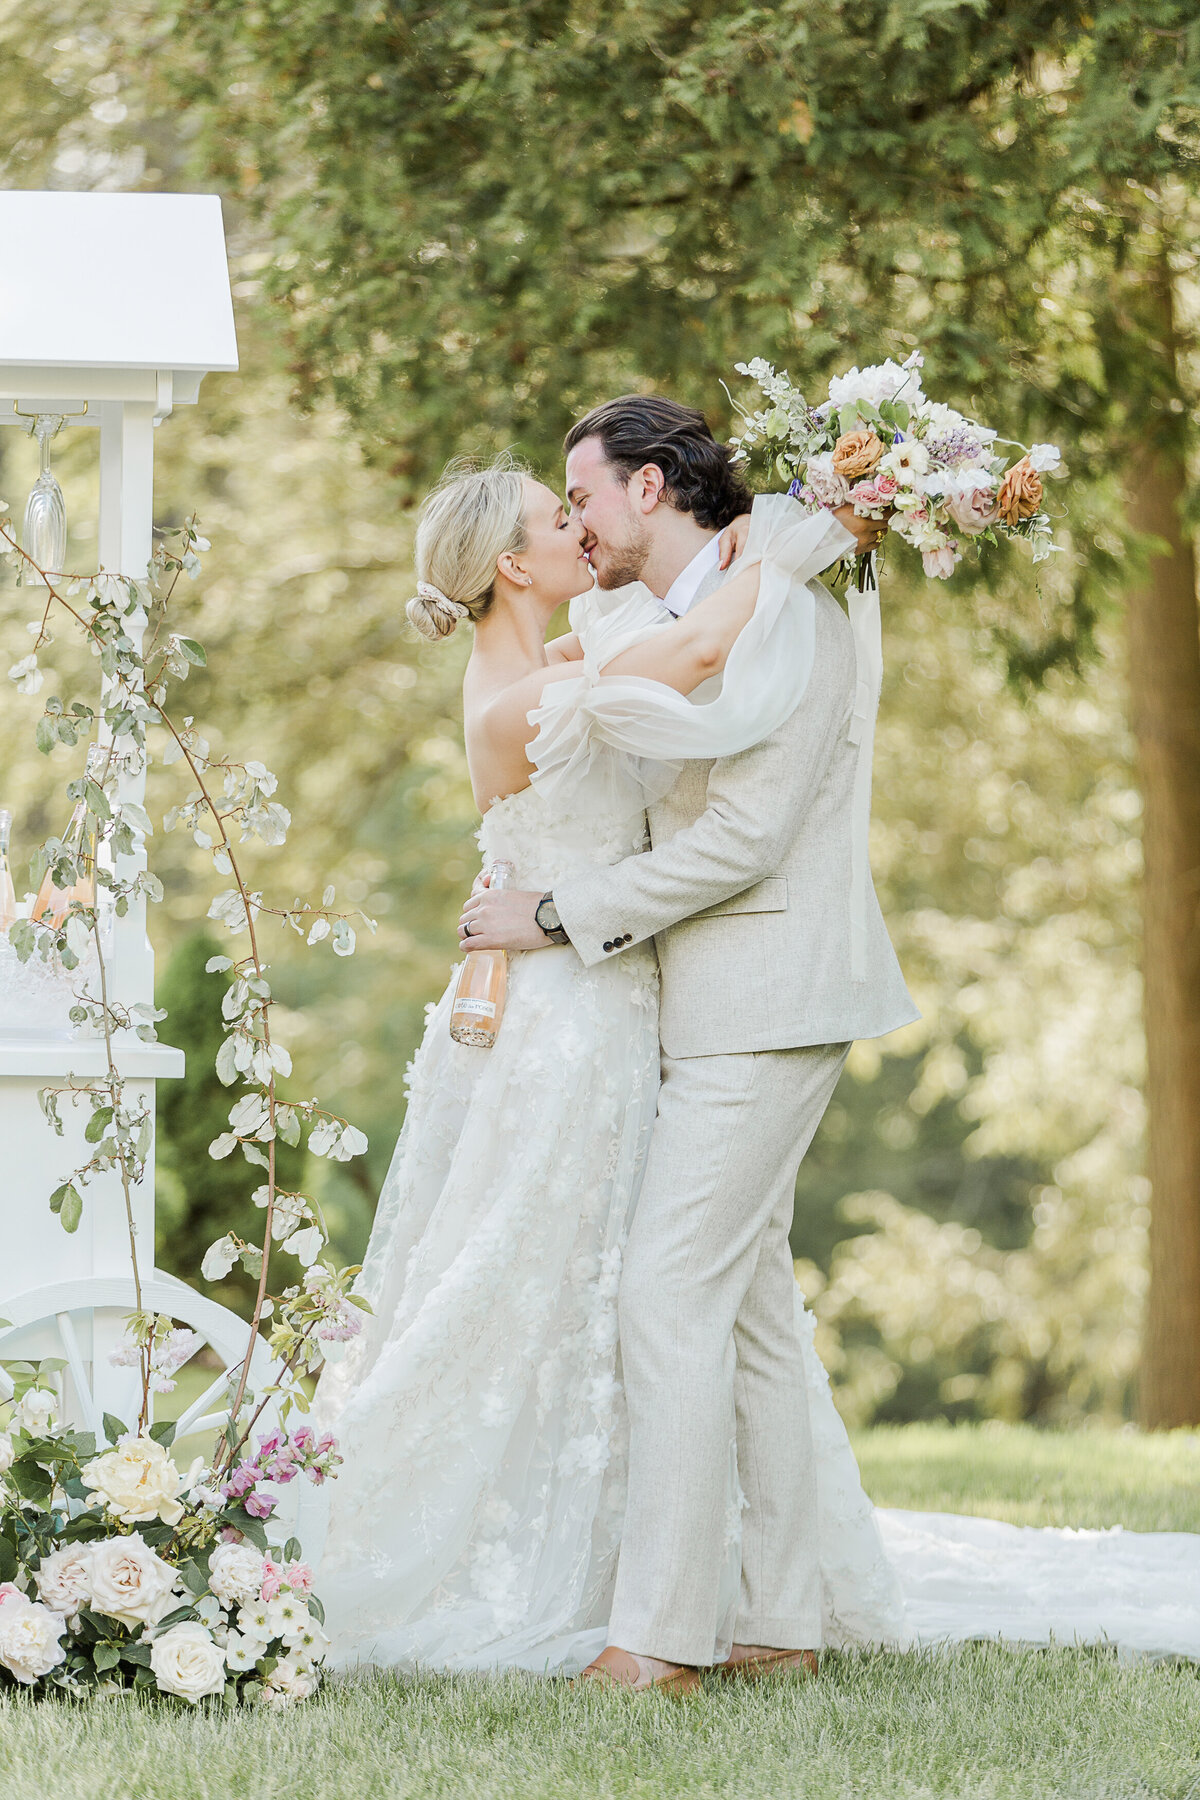 A bride and groom share a kiss at their wedding reception Her bouquet is draped over her groom's neck. Captured by top new england wedding photographer lia rose weddings.